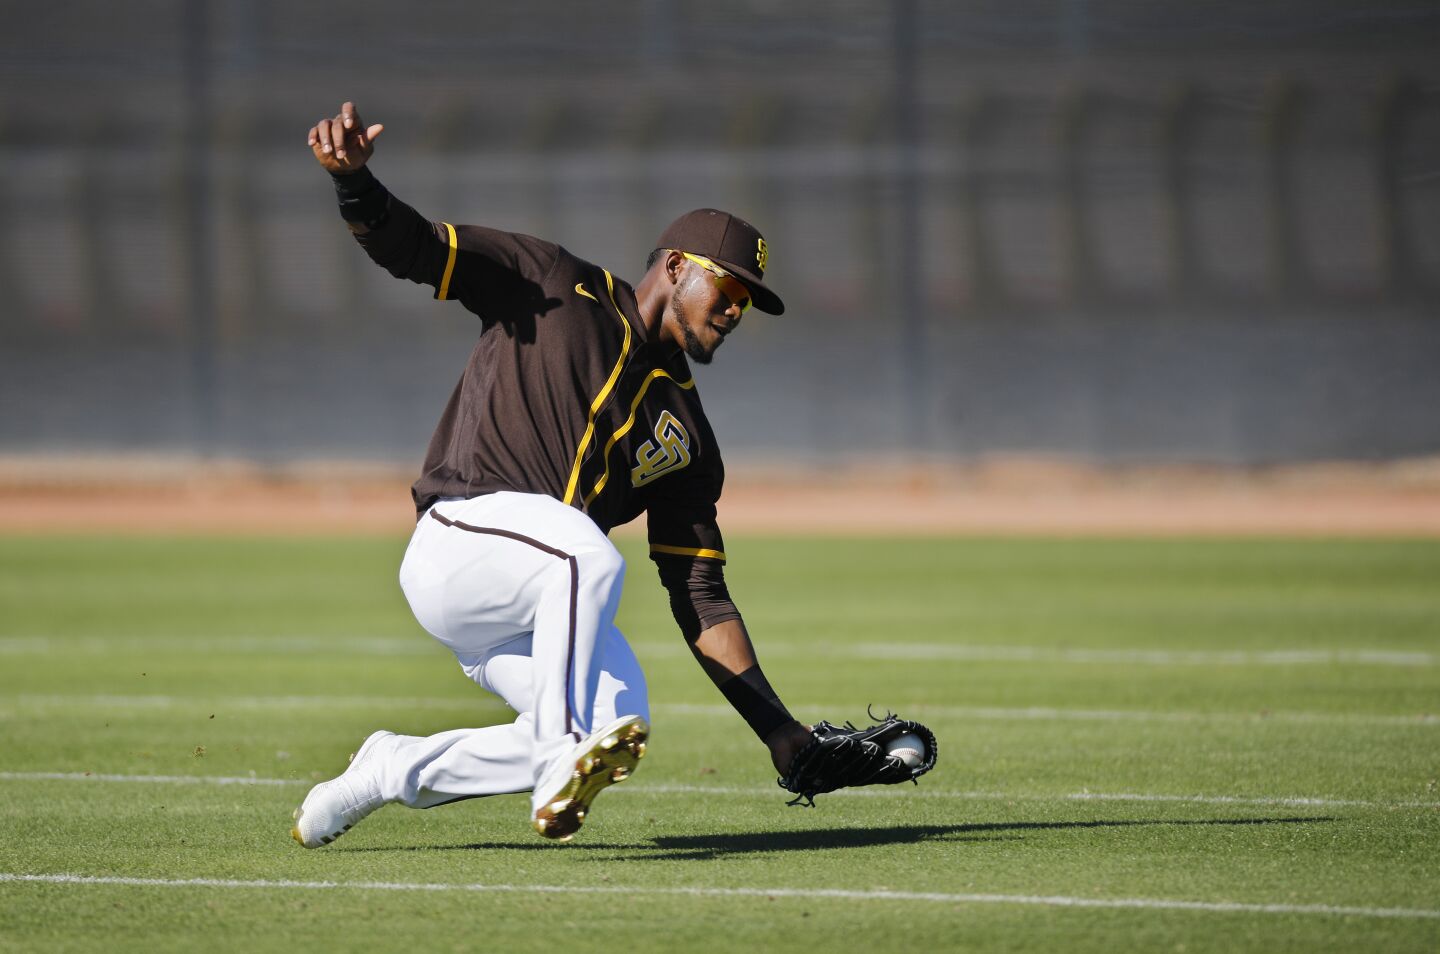 San Diego Padres Franchy Cordero catches a fly ball during a spring training practice on Feb. 20, 2020.